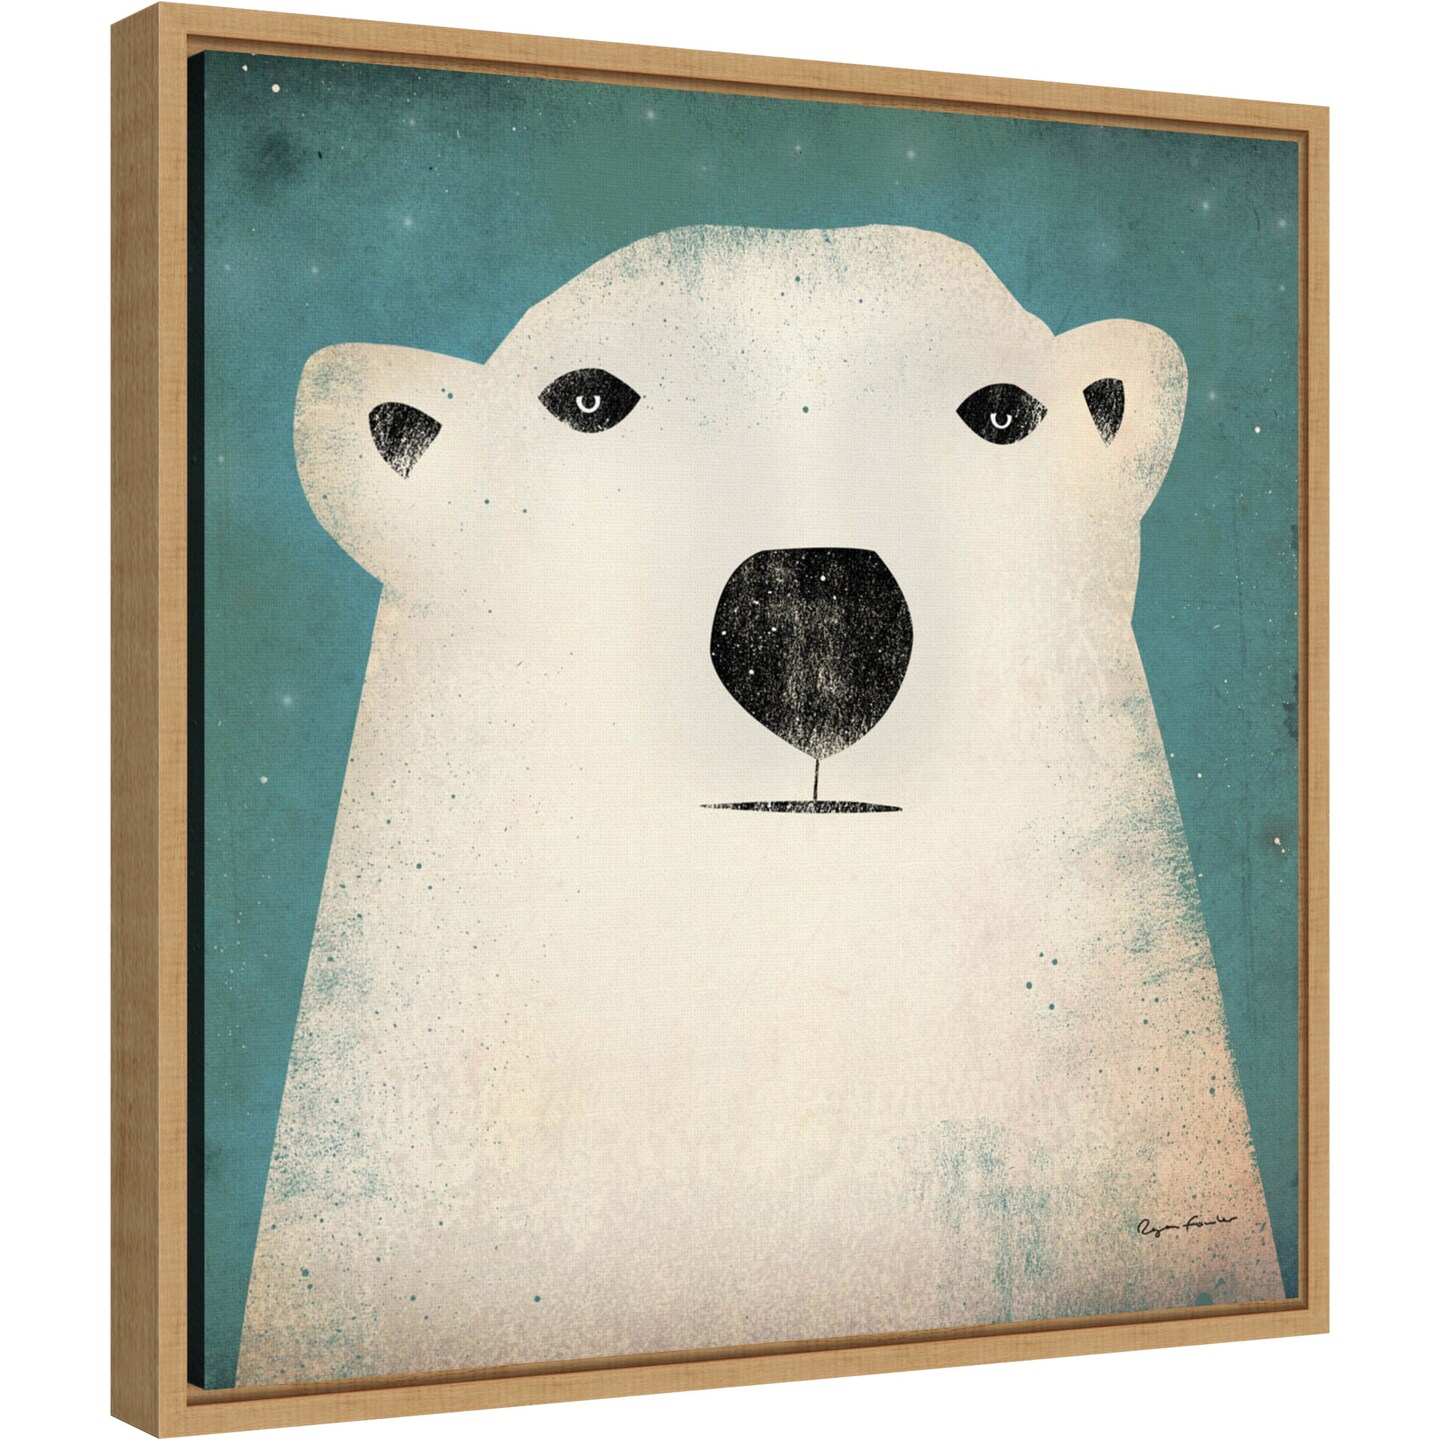 Polar Bear by Ryan Fowler 16-in. W x 16-in. H. Canvas Wall Art Print Framed in Natural